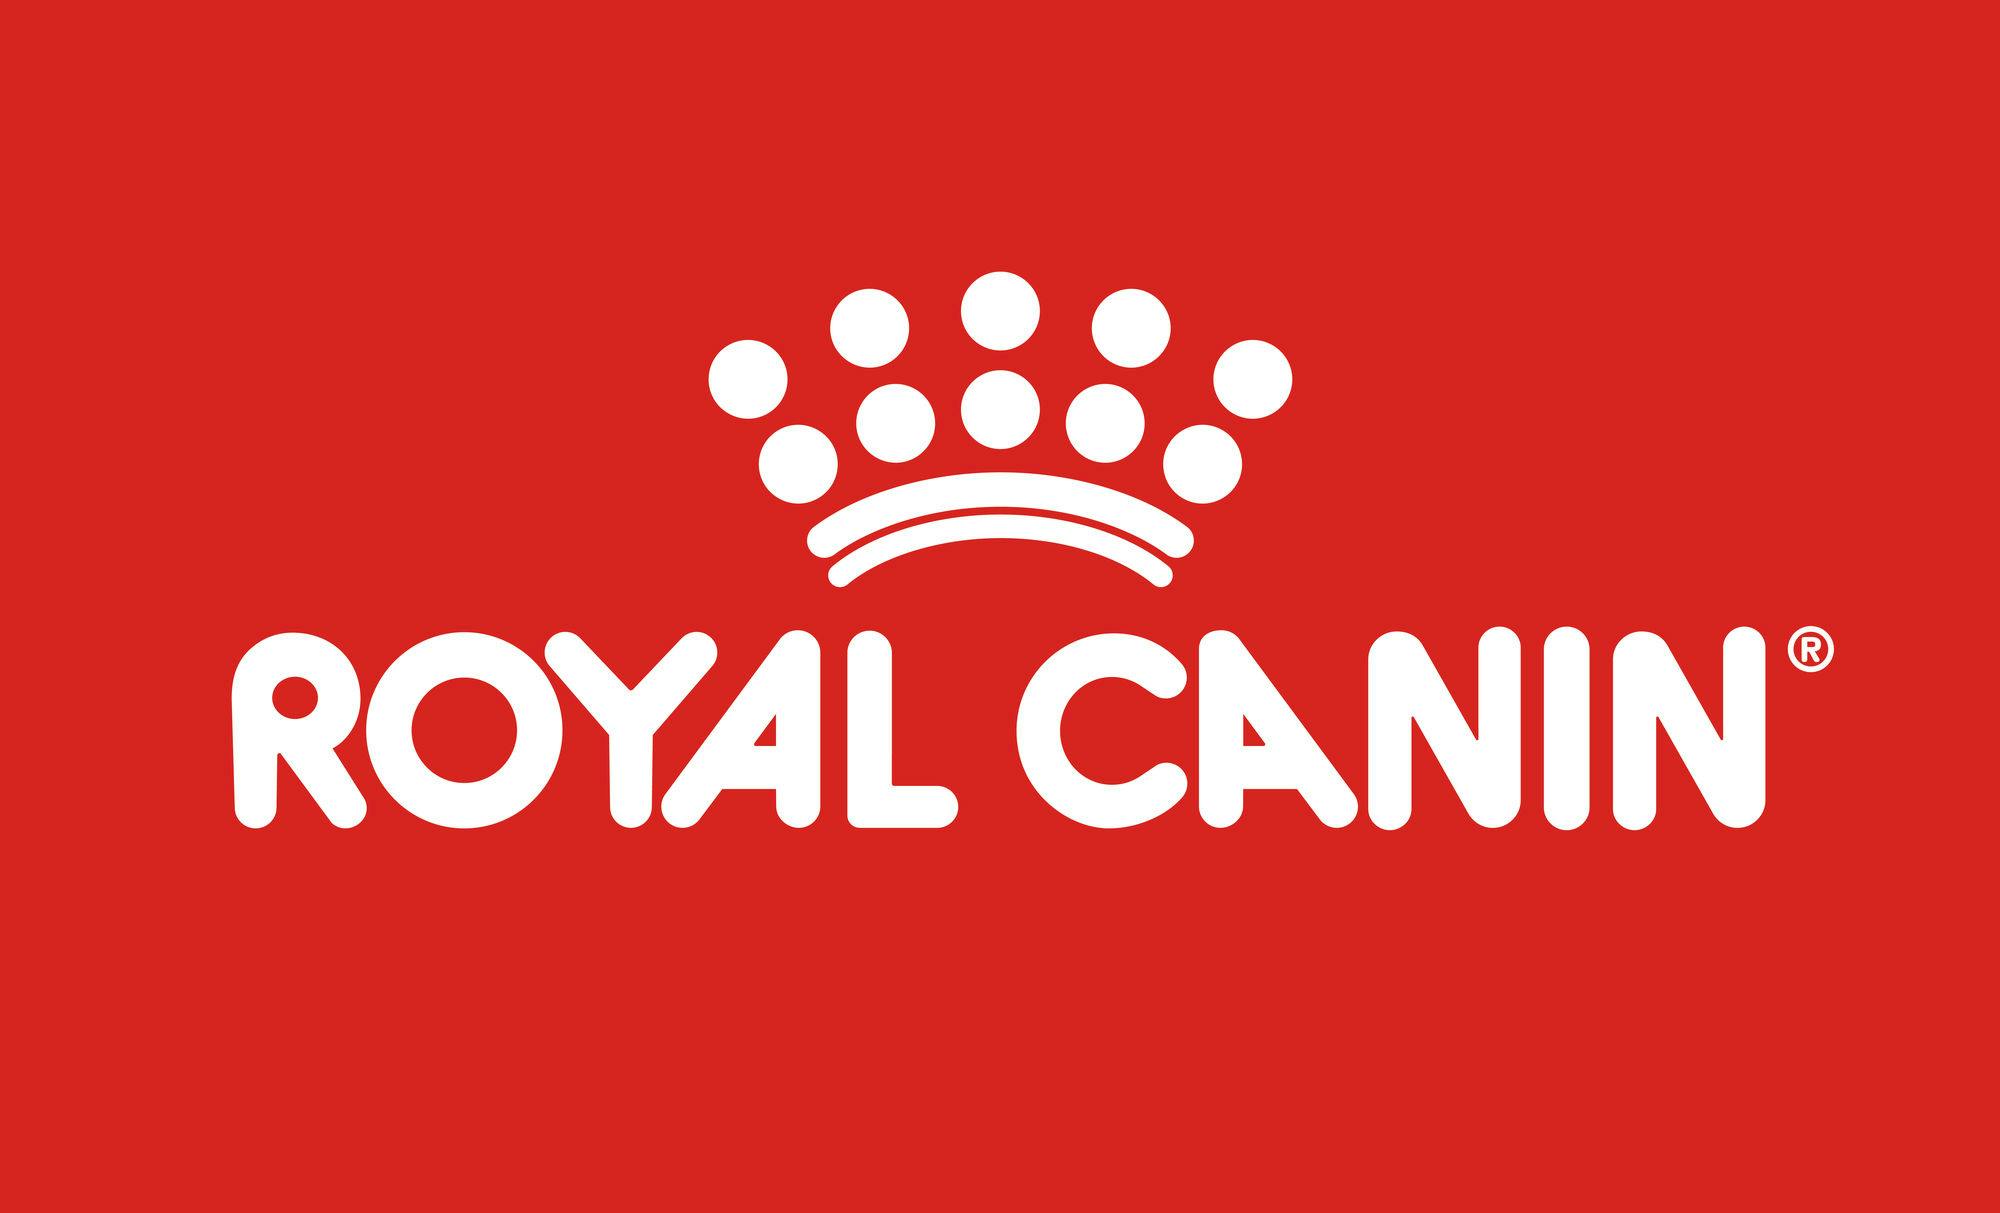 We never compromise on quality | Royal Canin